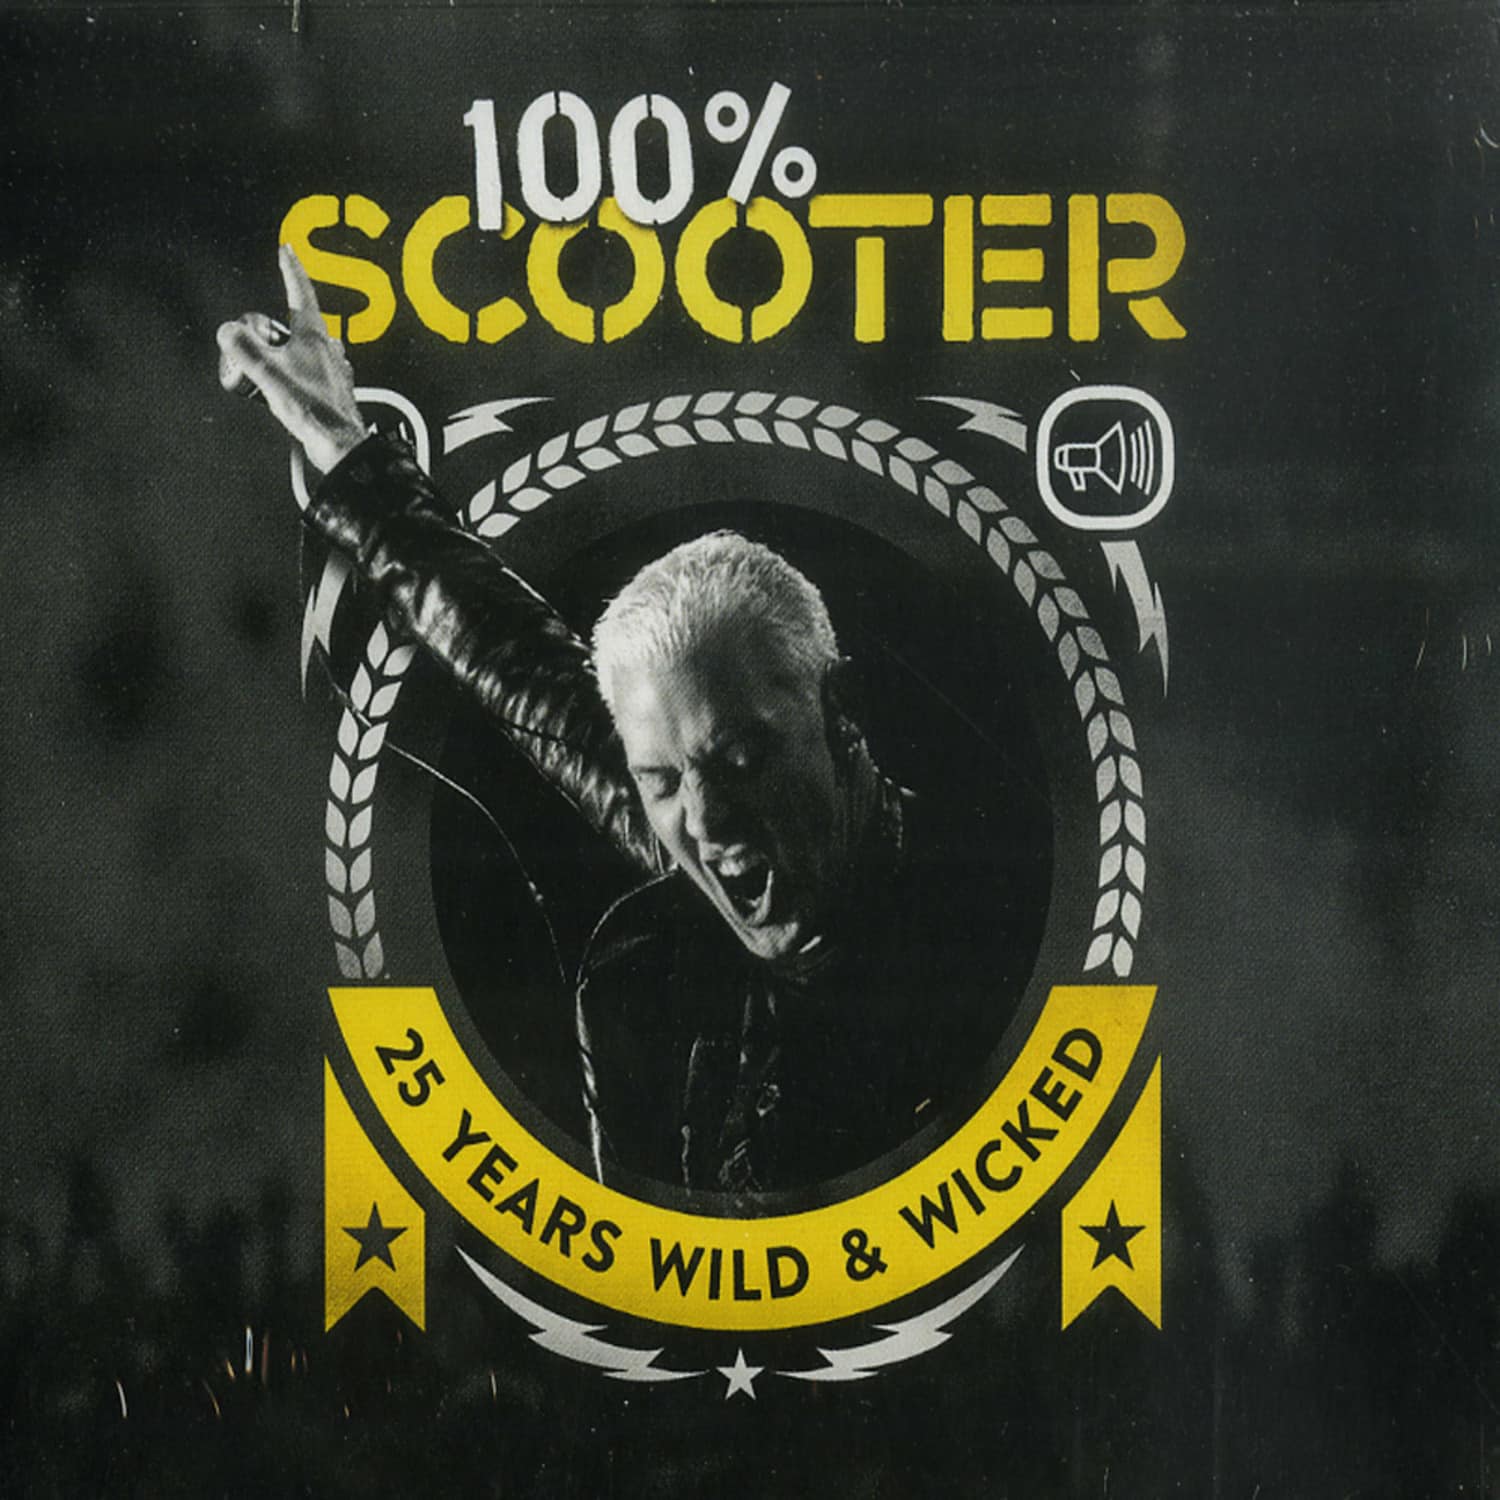 Scooter - 100% SCOOTER-25 YEARS WILD & WICKED 